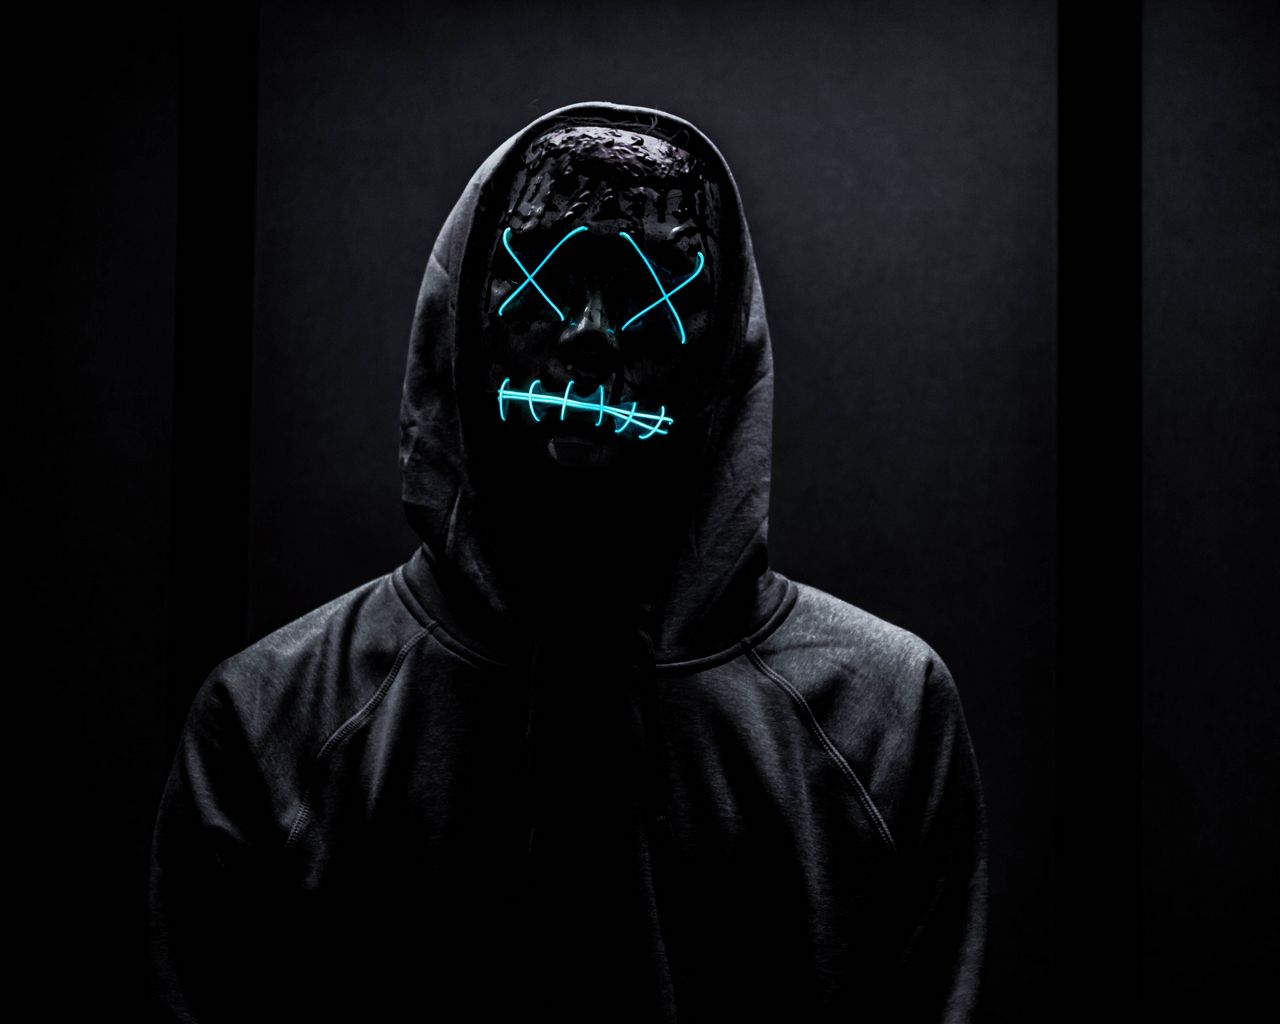 Download wallpaper 1280x1024 mask, neon, anonymous, black standard 5:4 hd  background